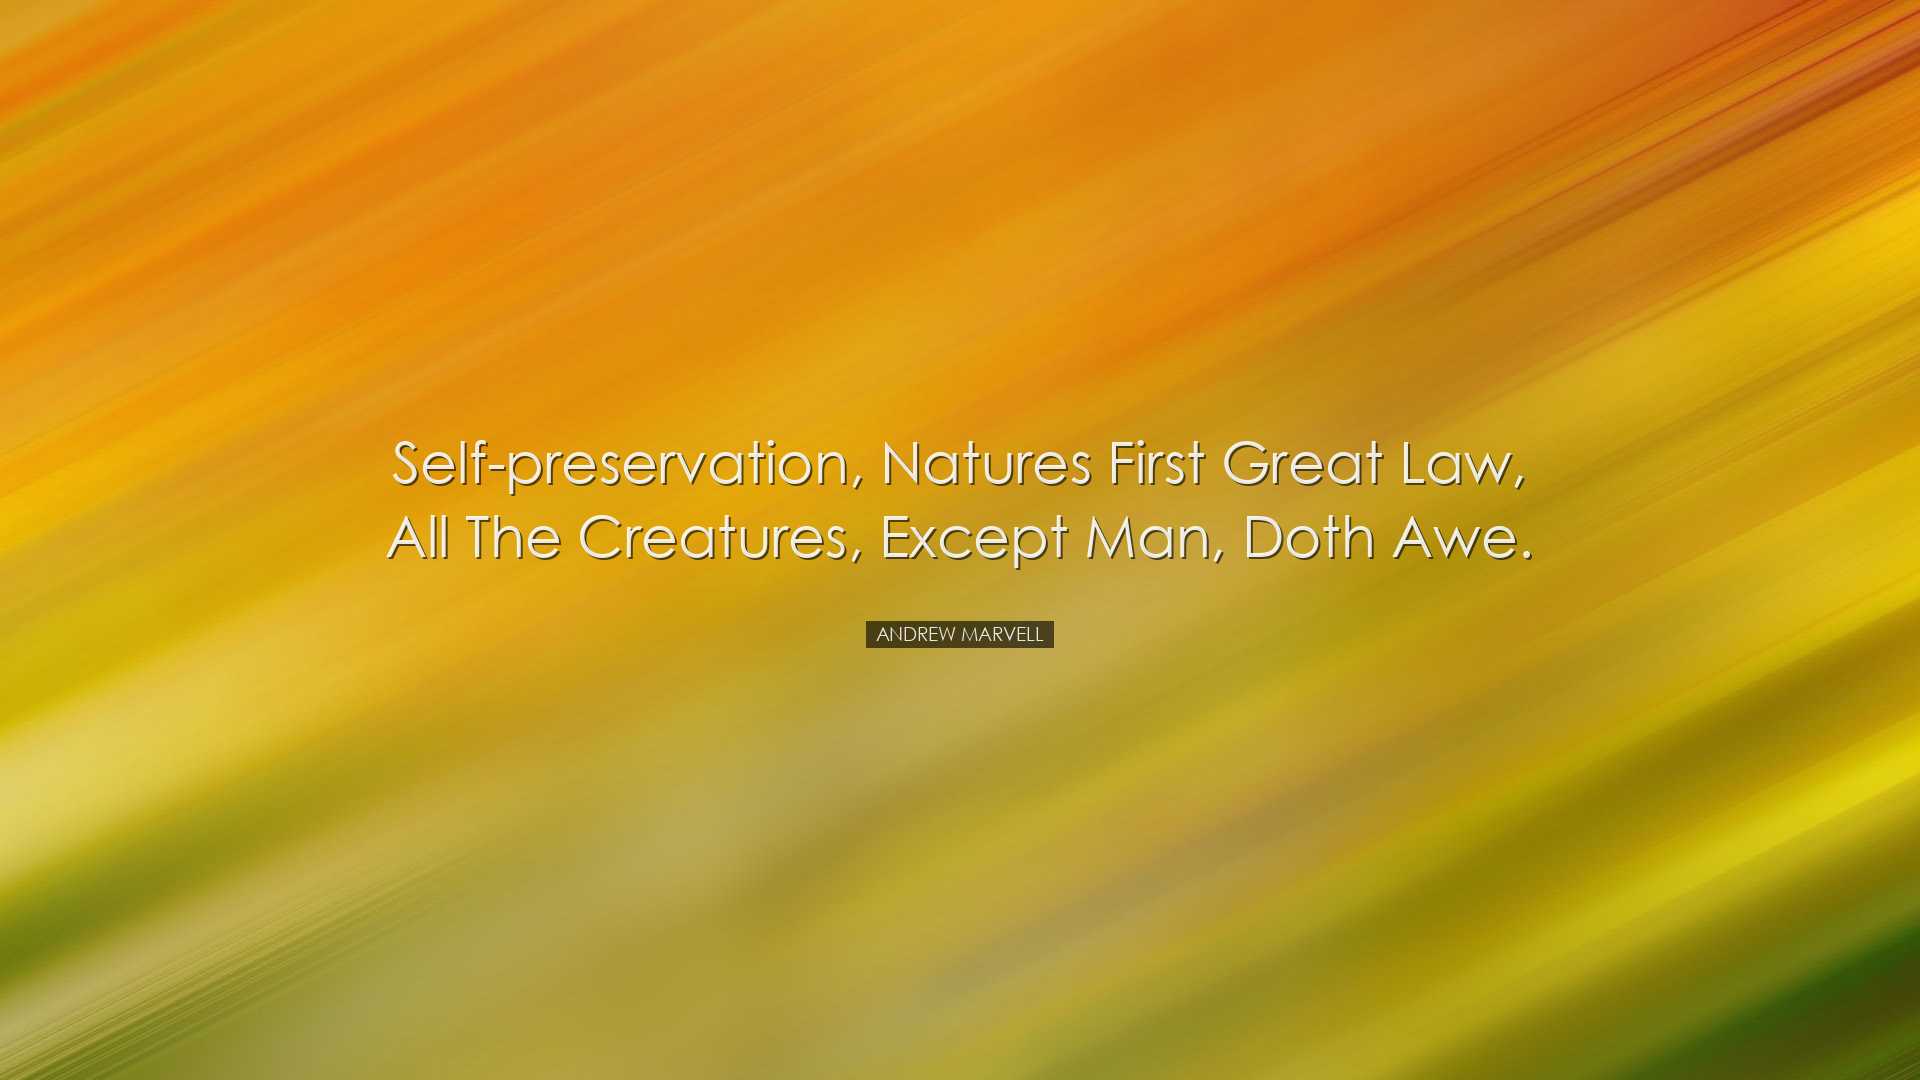 Self-preservation, natures first great law, all the creatures, exc